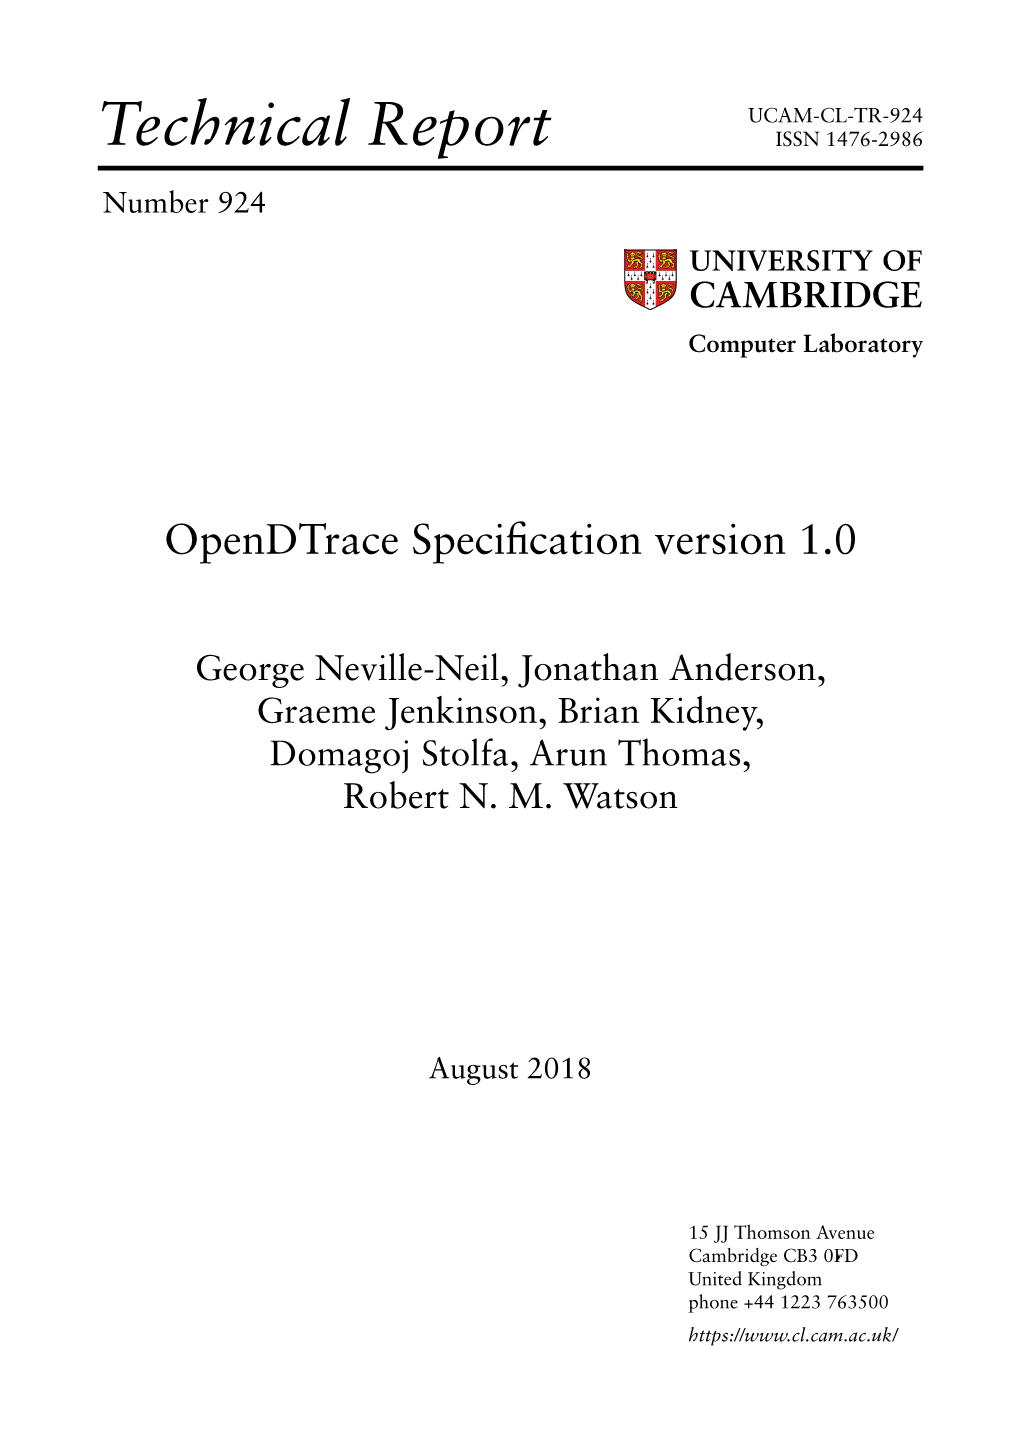 Dtrace Speciﬁcation Version 1.0